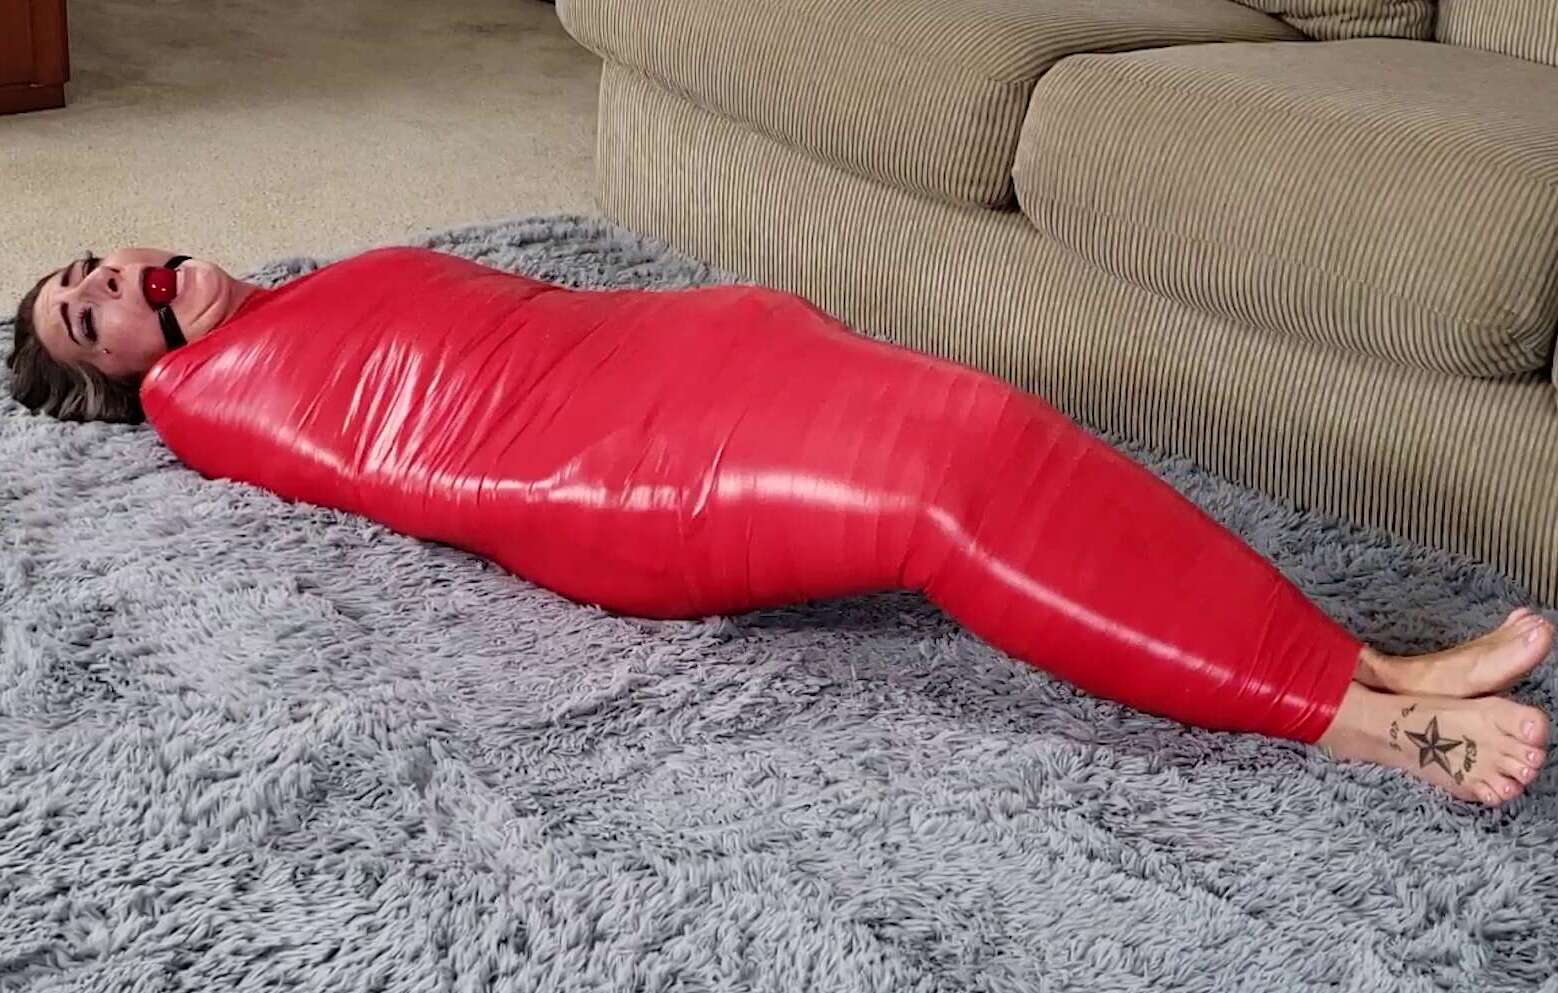 Beautiful fit woman wrapped up tightly - Savannah - Red Mummy Misery - Gag Talk